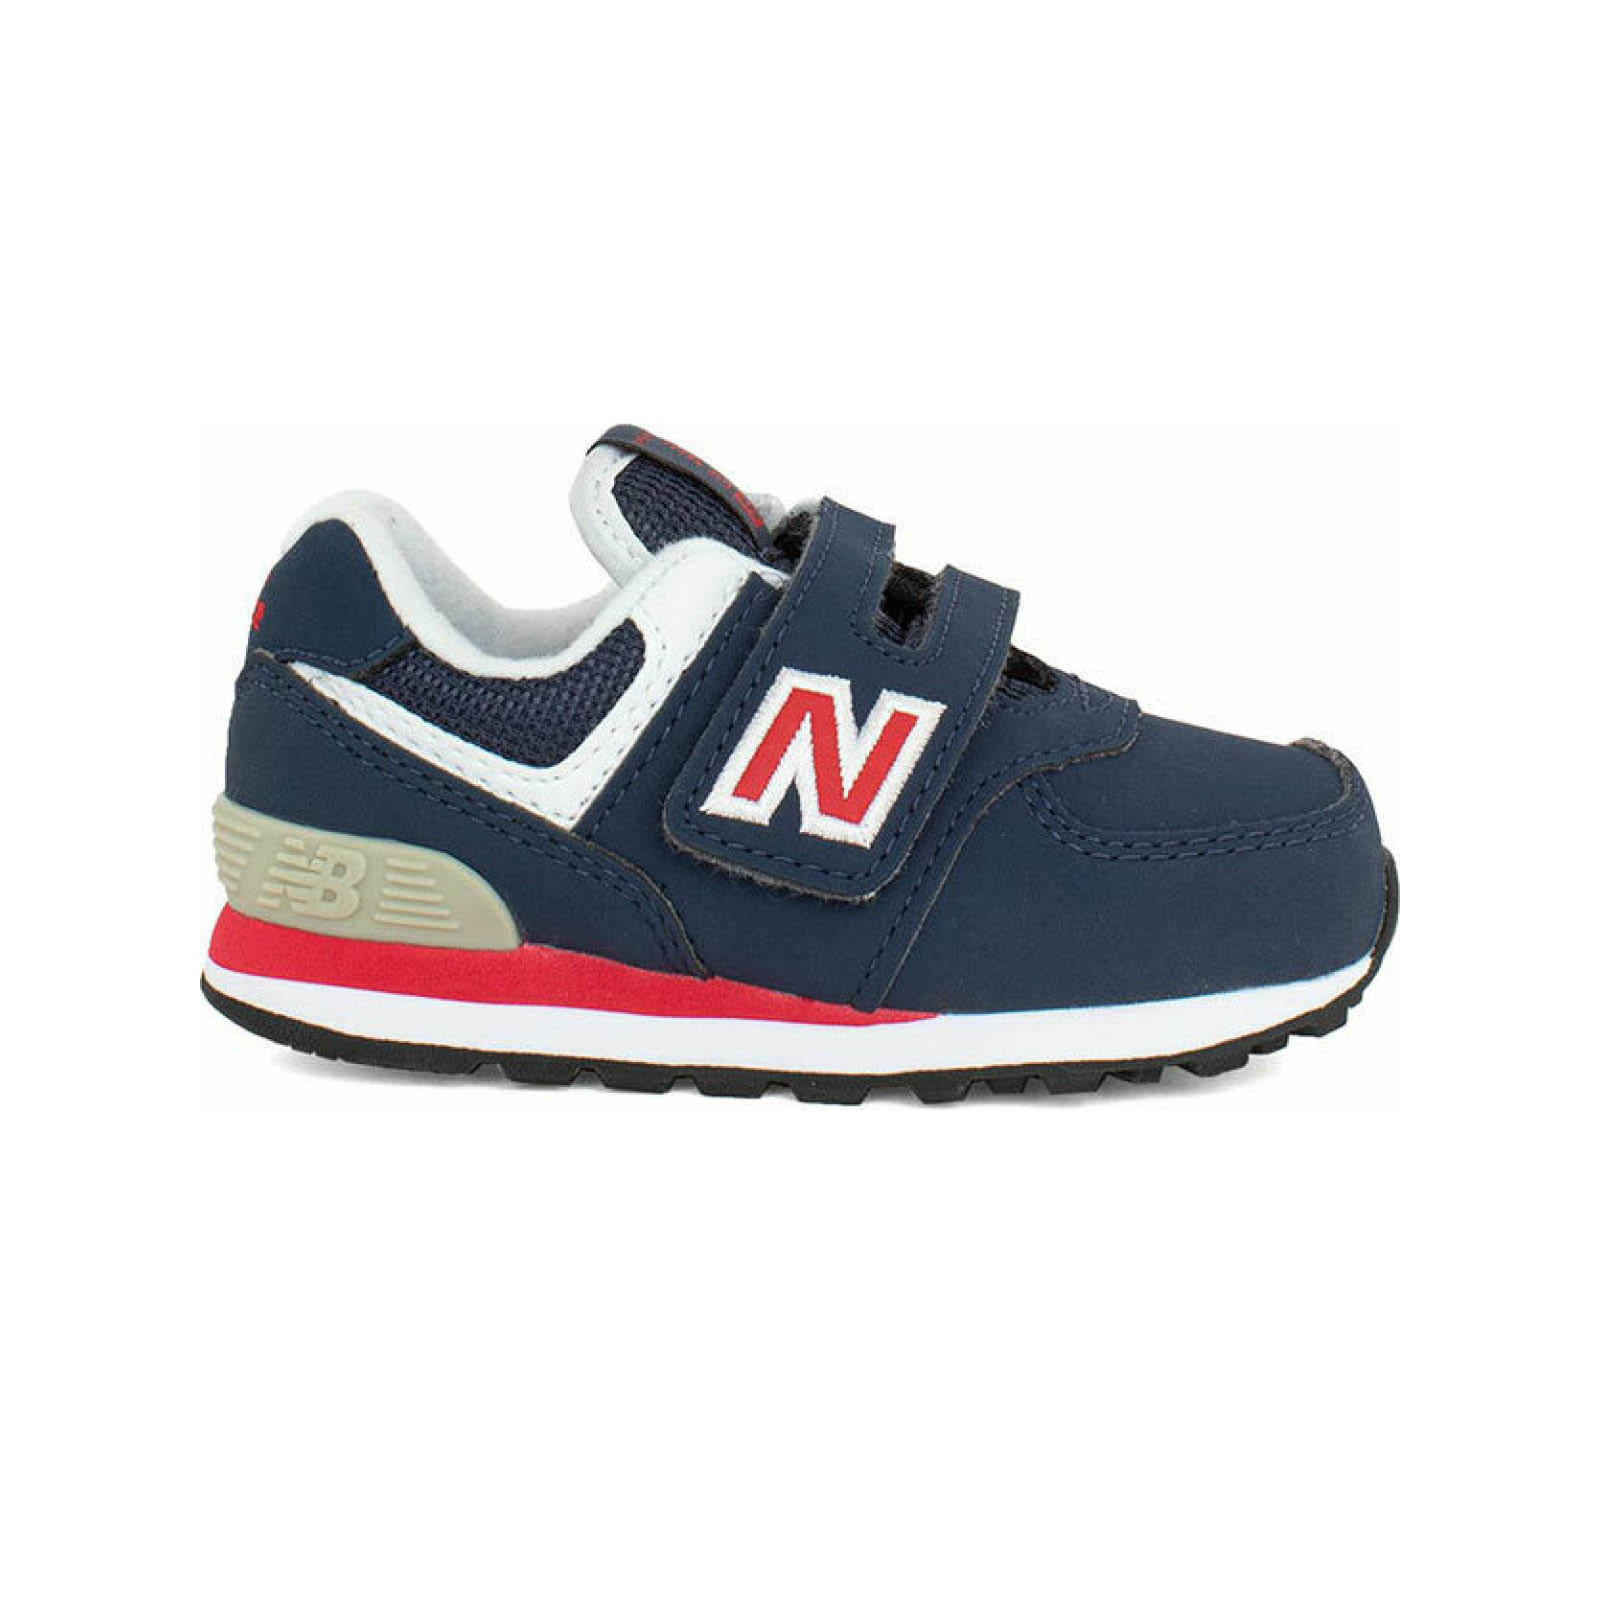 New Balance - SHOES CLASSIC RUNNING - NAVY/RED Παιδικά > Παπούτσια > Αθλητικά > Παπούτσι Low Cut